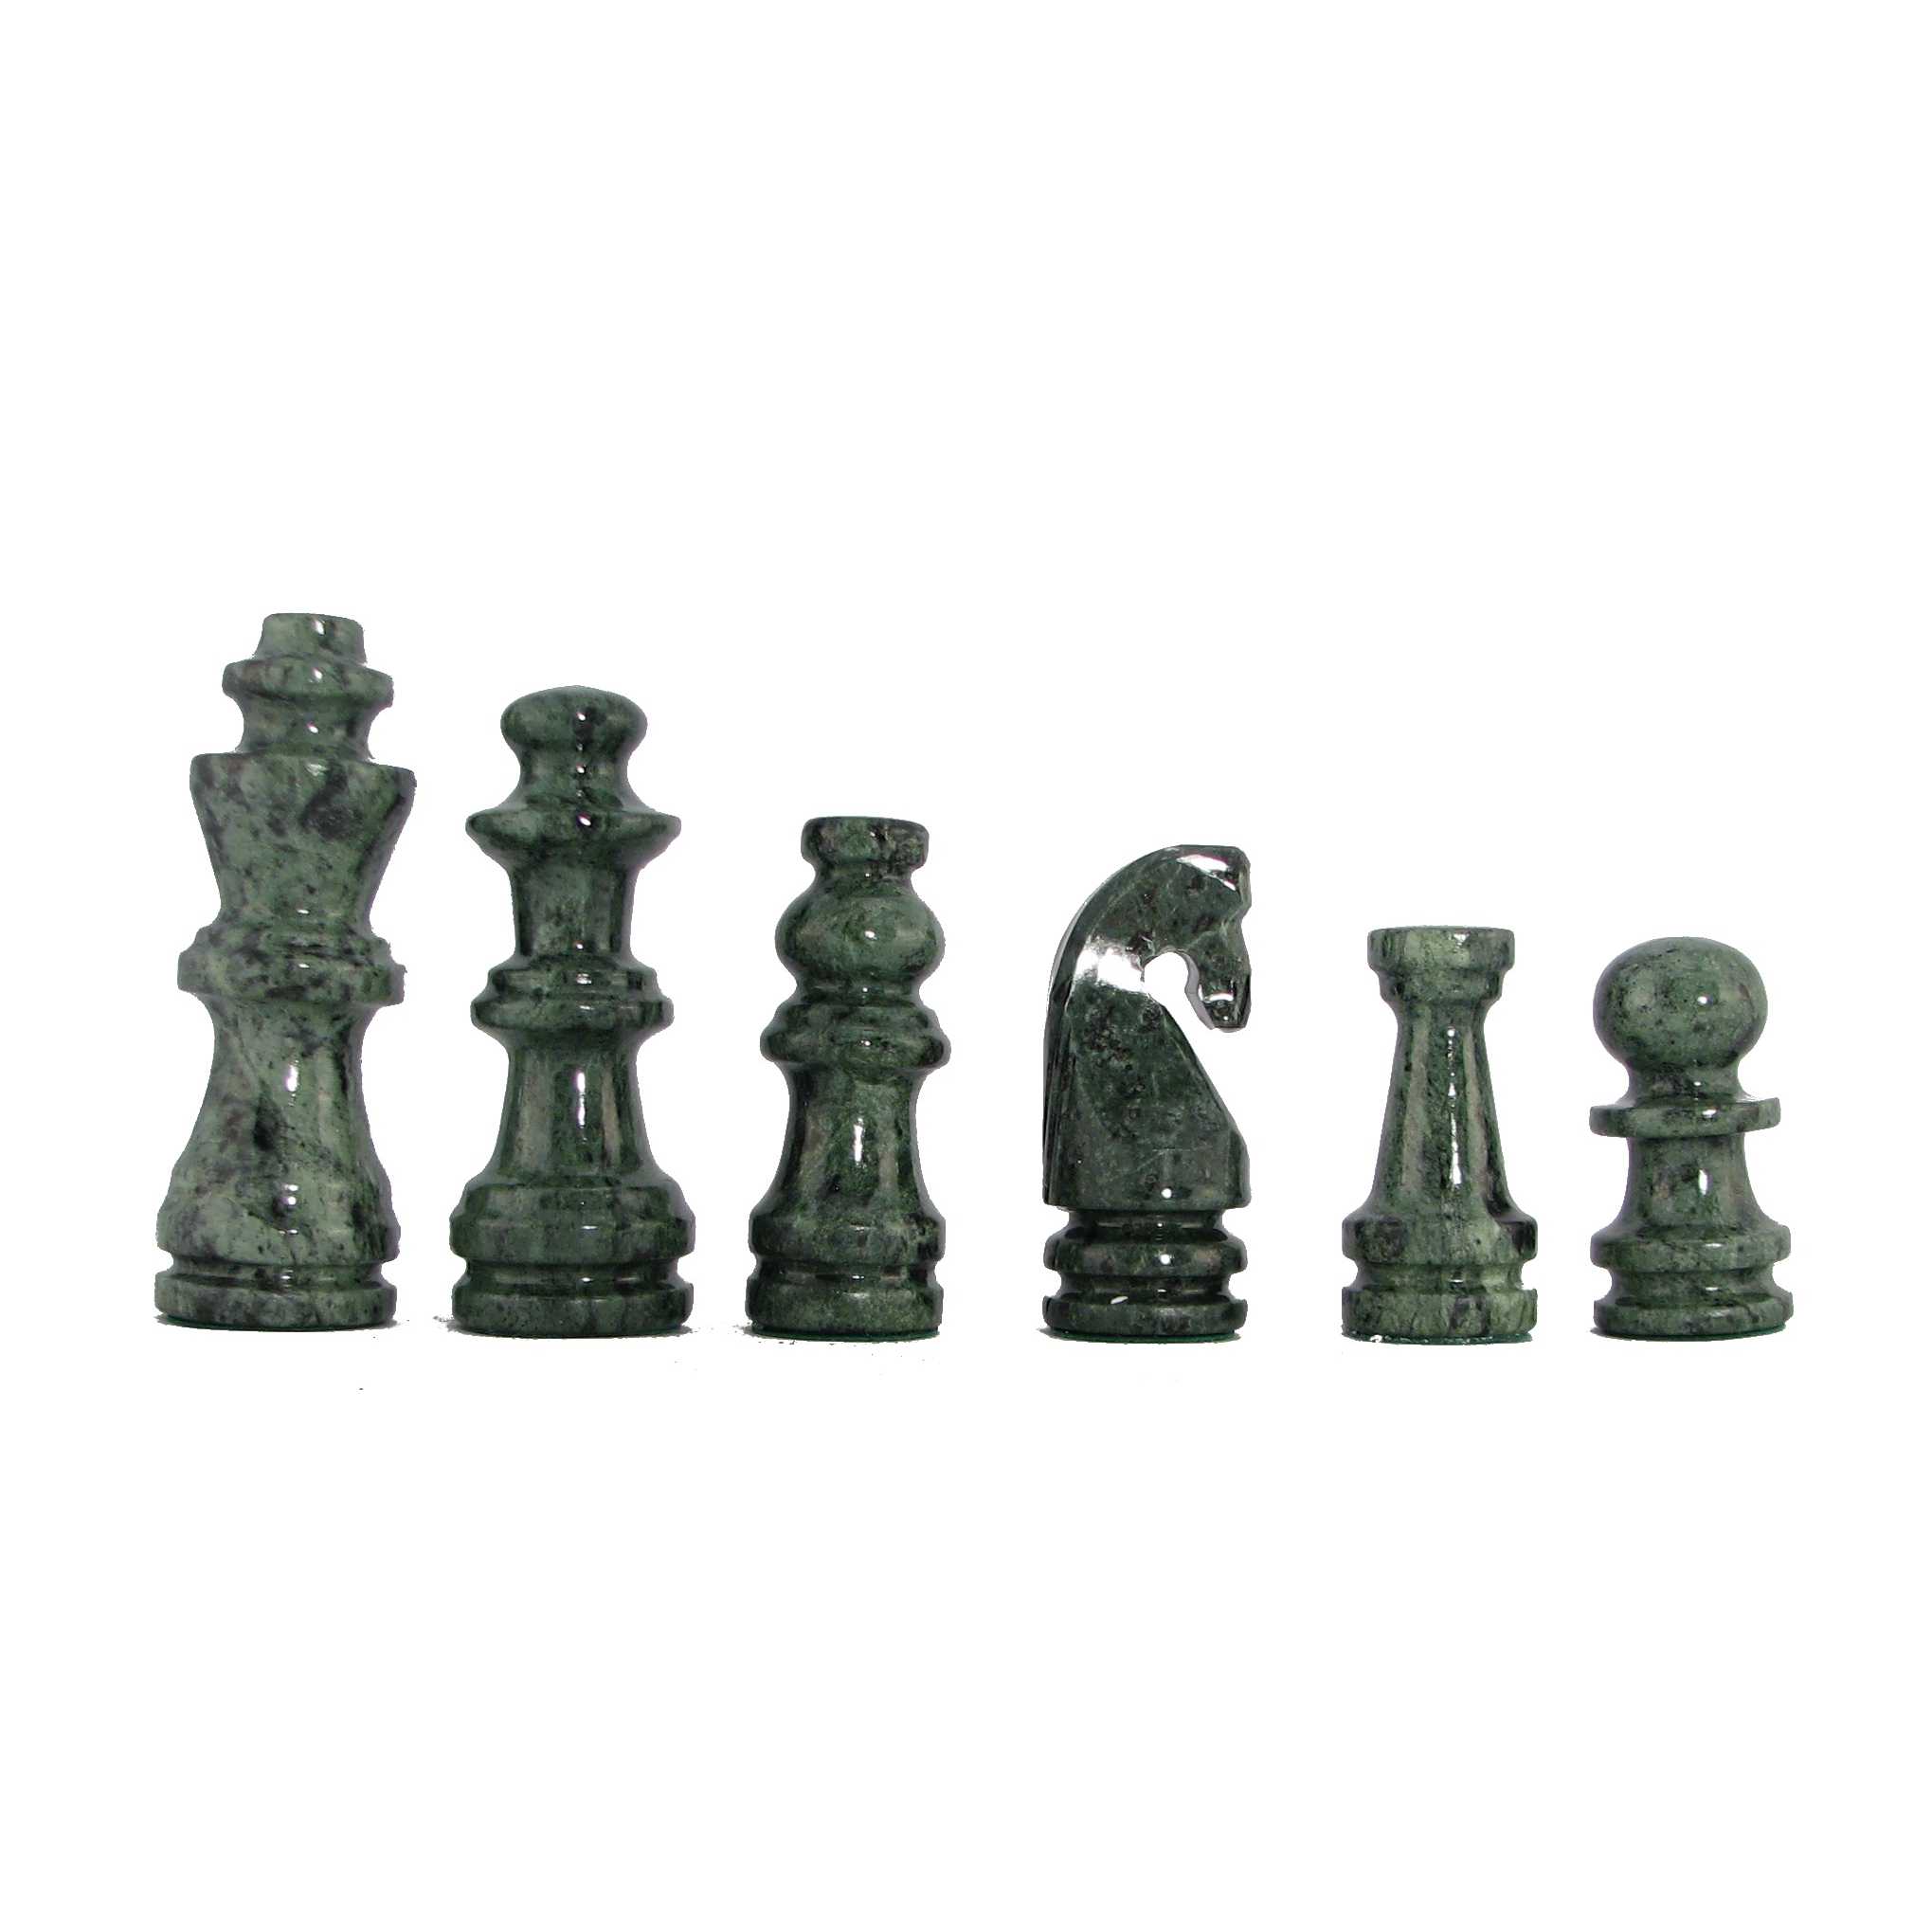 16 Marble Chess Set in Coral and Red – Chess House